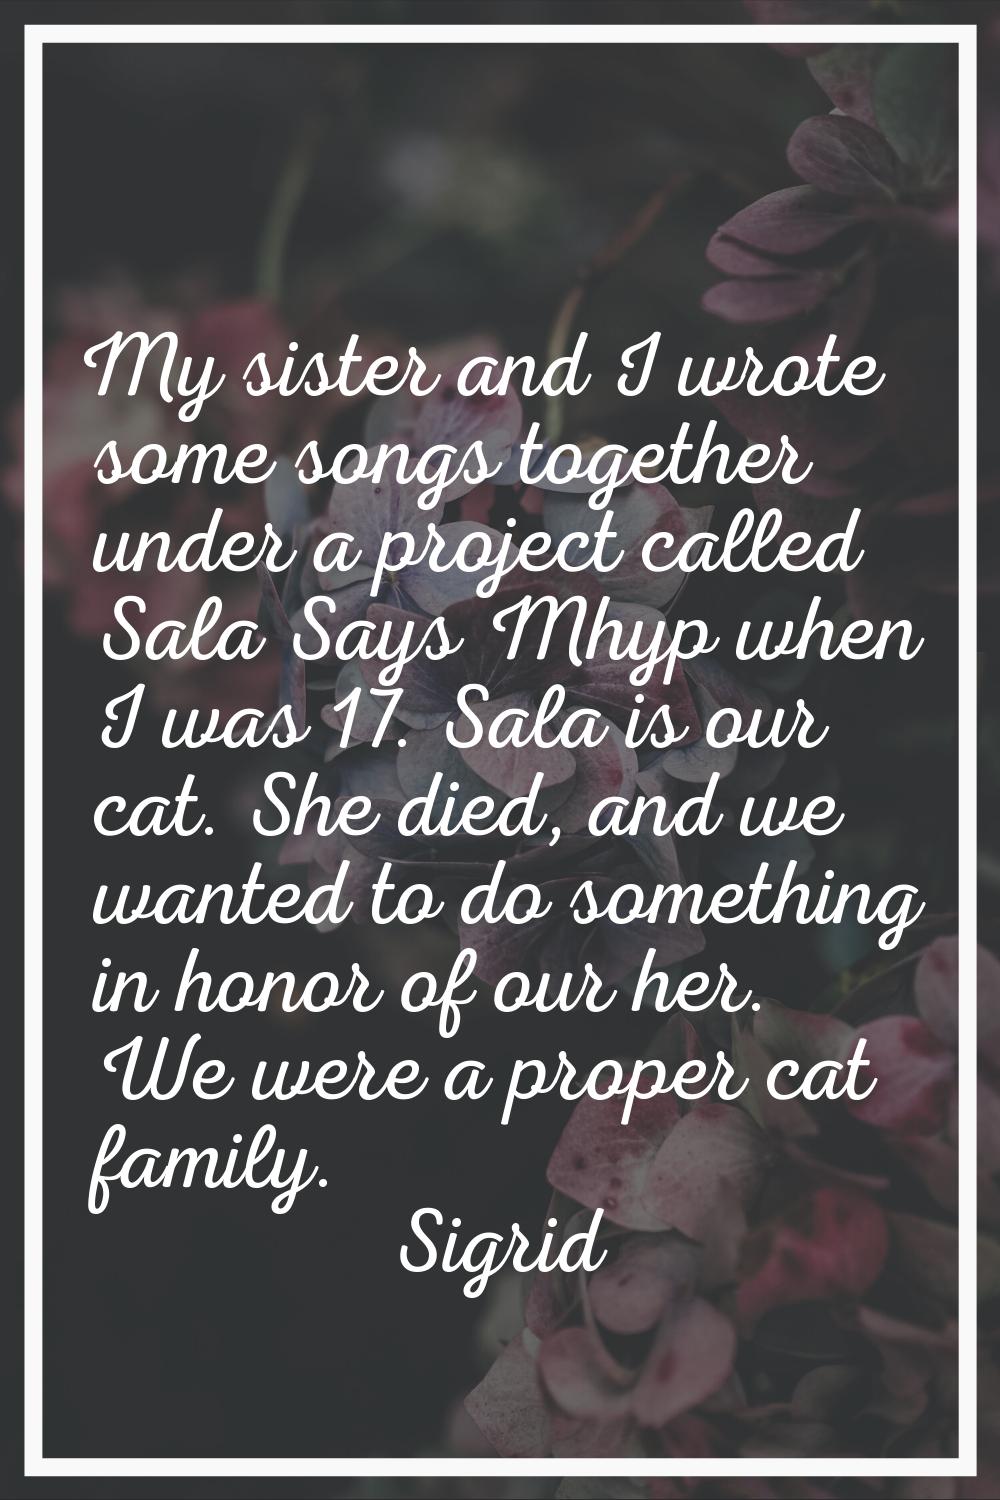 My sister and I wrote some songs together under a project called Sala Says Mhyp when I was 17. Sala